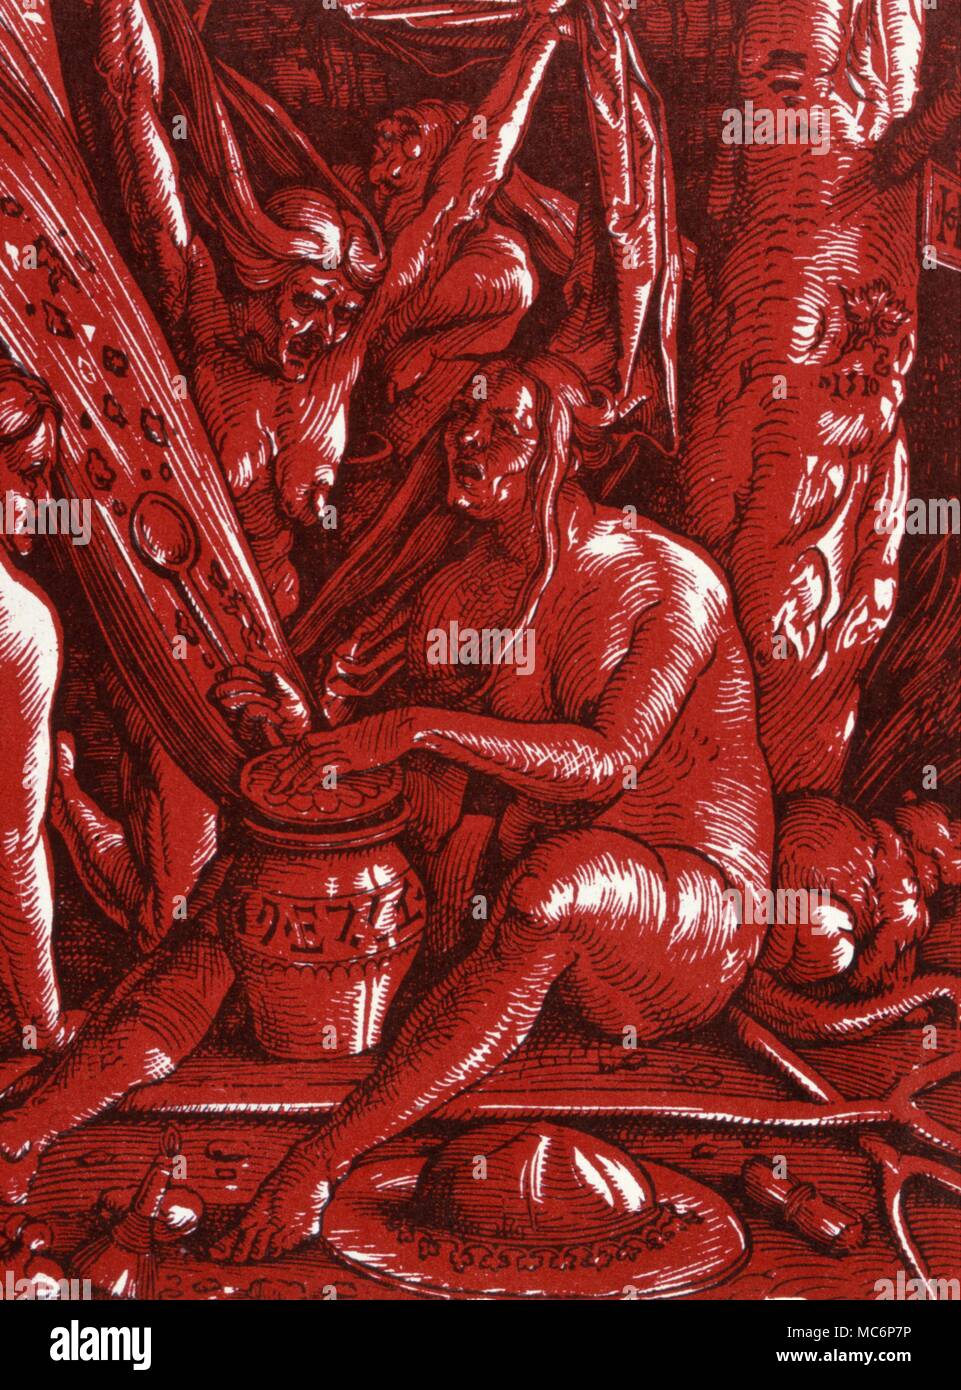 Witches making spells, probably to raise winds. Detail from a two-block woodprint by Hans Baldung Grien, 1510. Note the demonic head drawn above the date, marked on the tree. Stock Photo